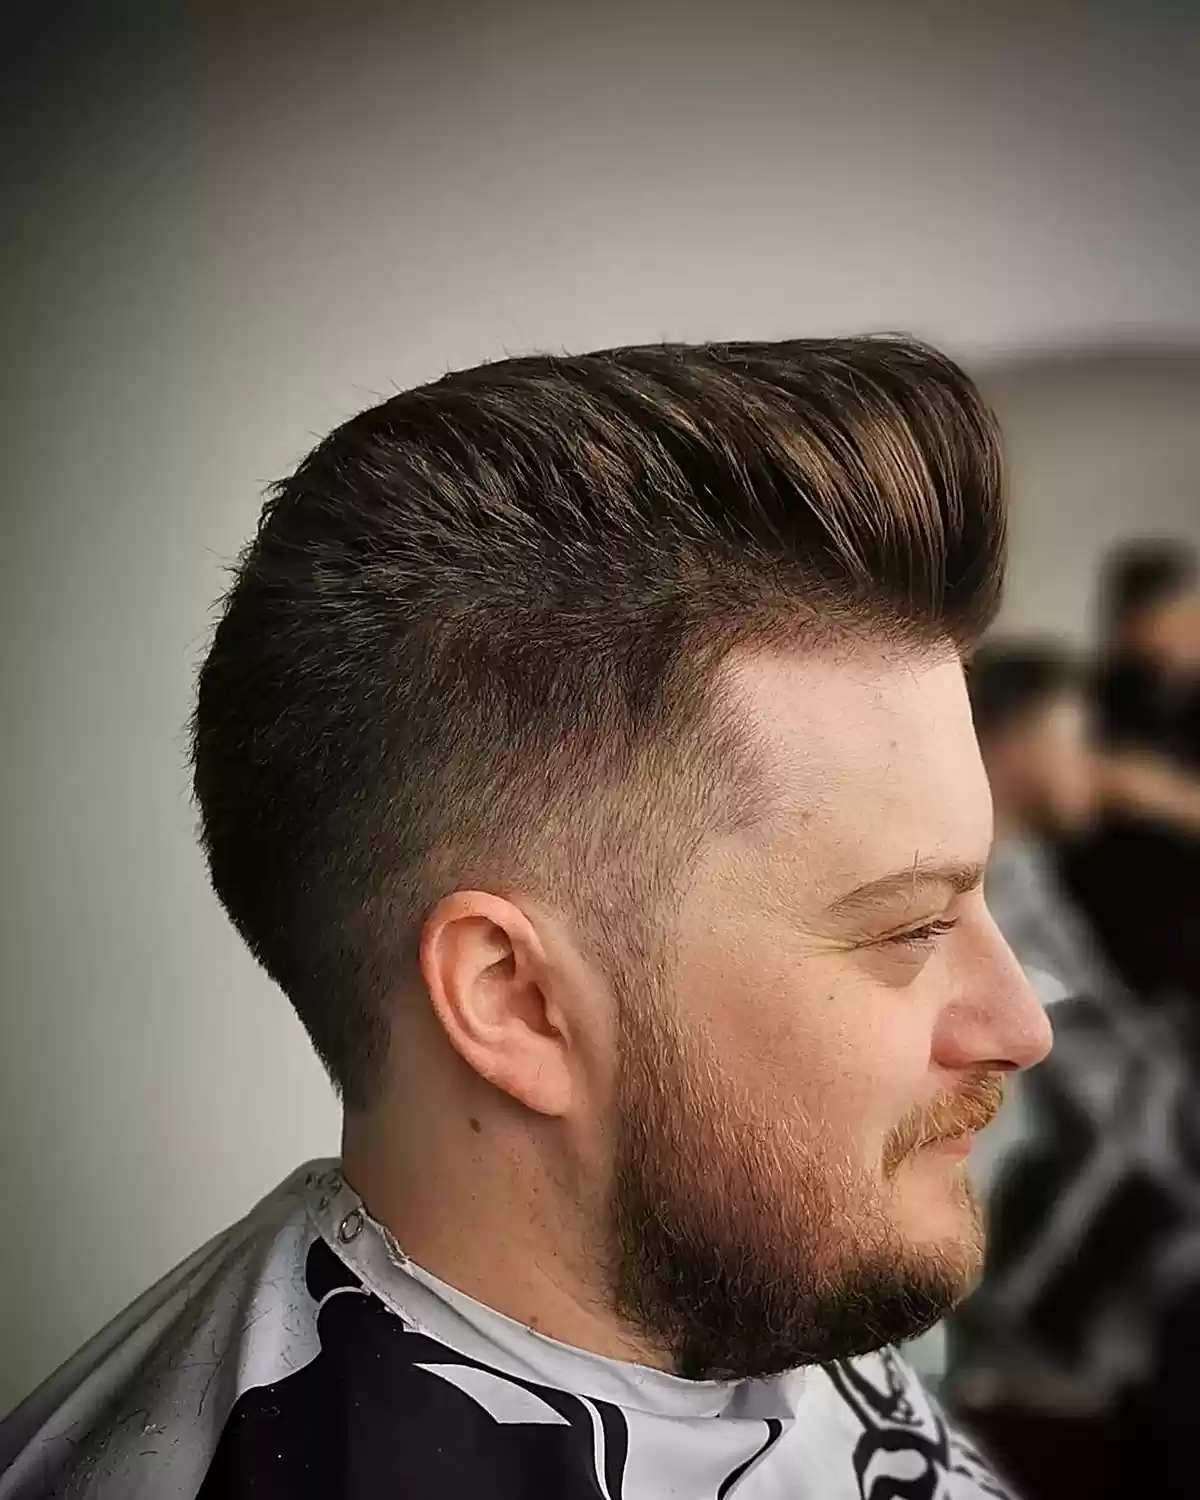 The 50 Coolest Pompadour Haircuts for Men Blowin' Up Right Now